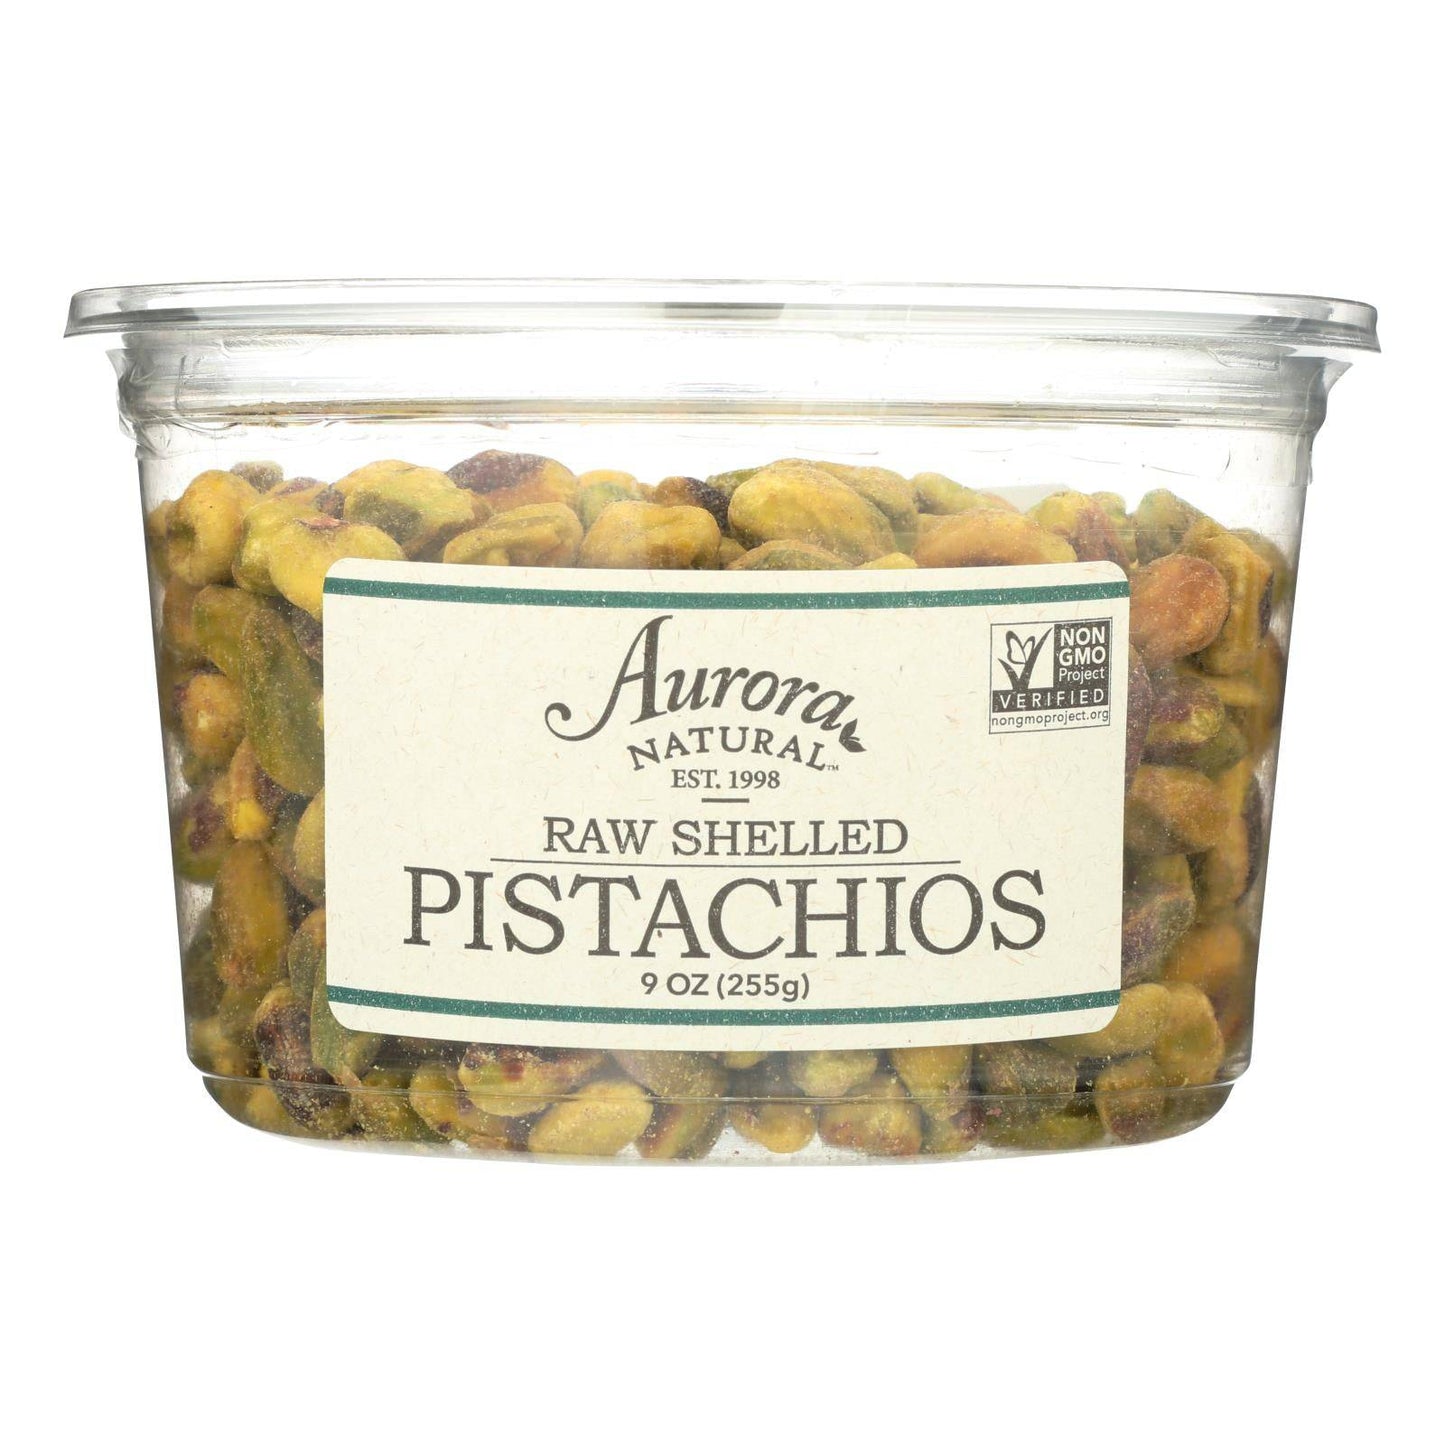 Aurora Natural Products - Raw Shelled Pistachios - Case Of 12 - 9 Oz. | OnlyNaturals.us